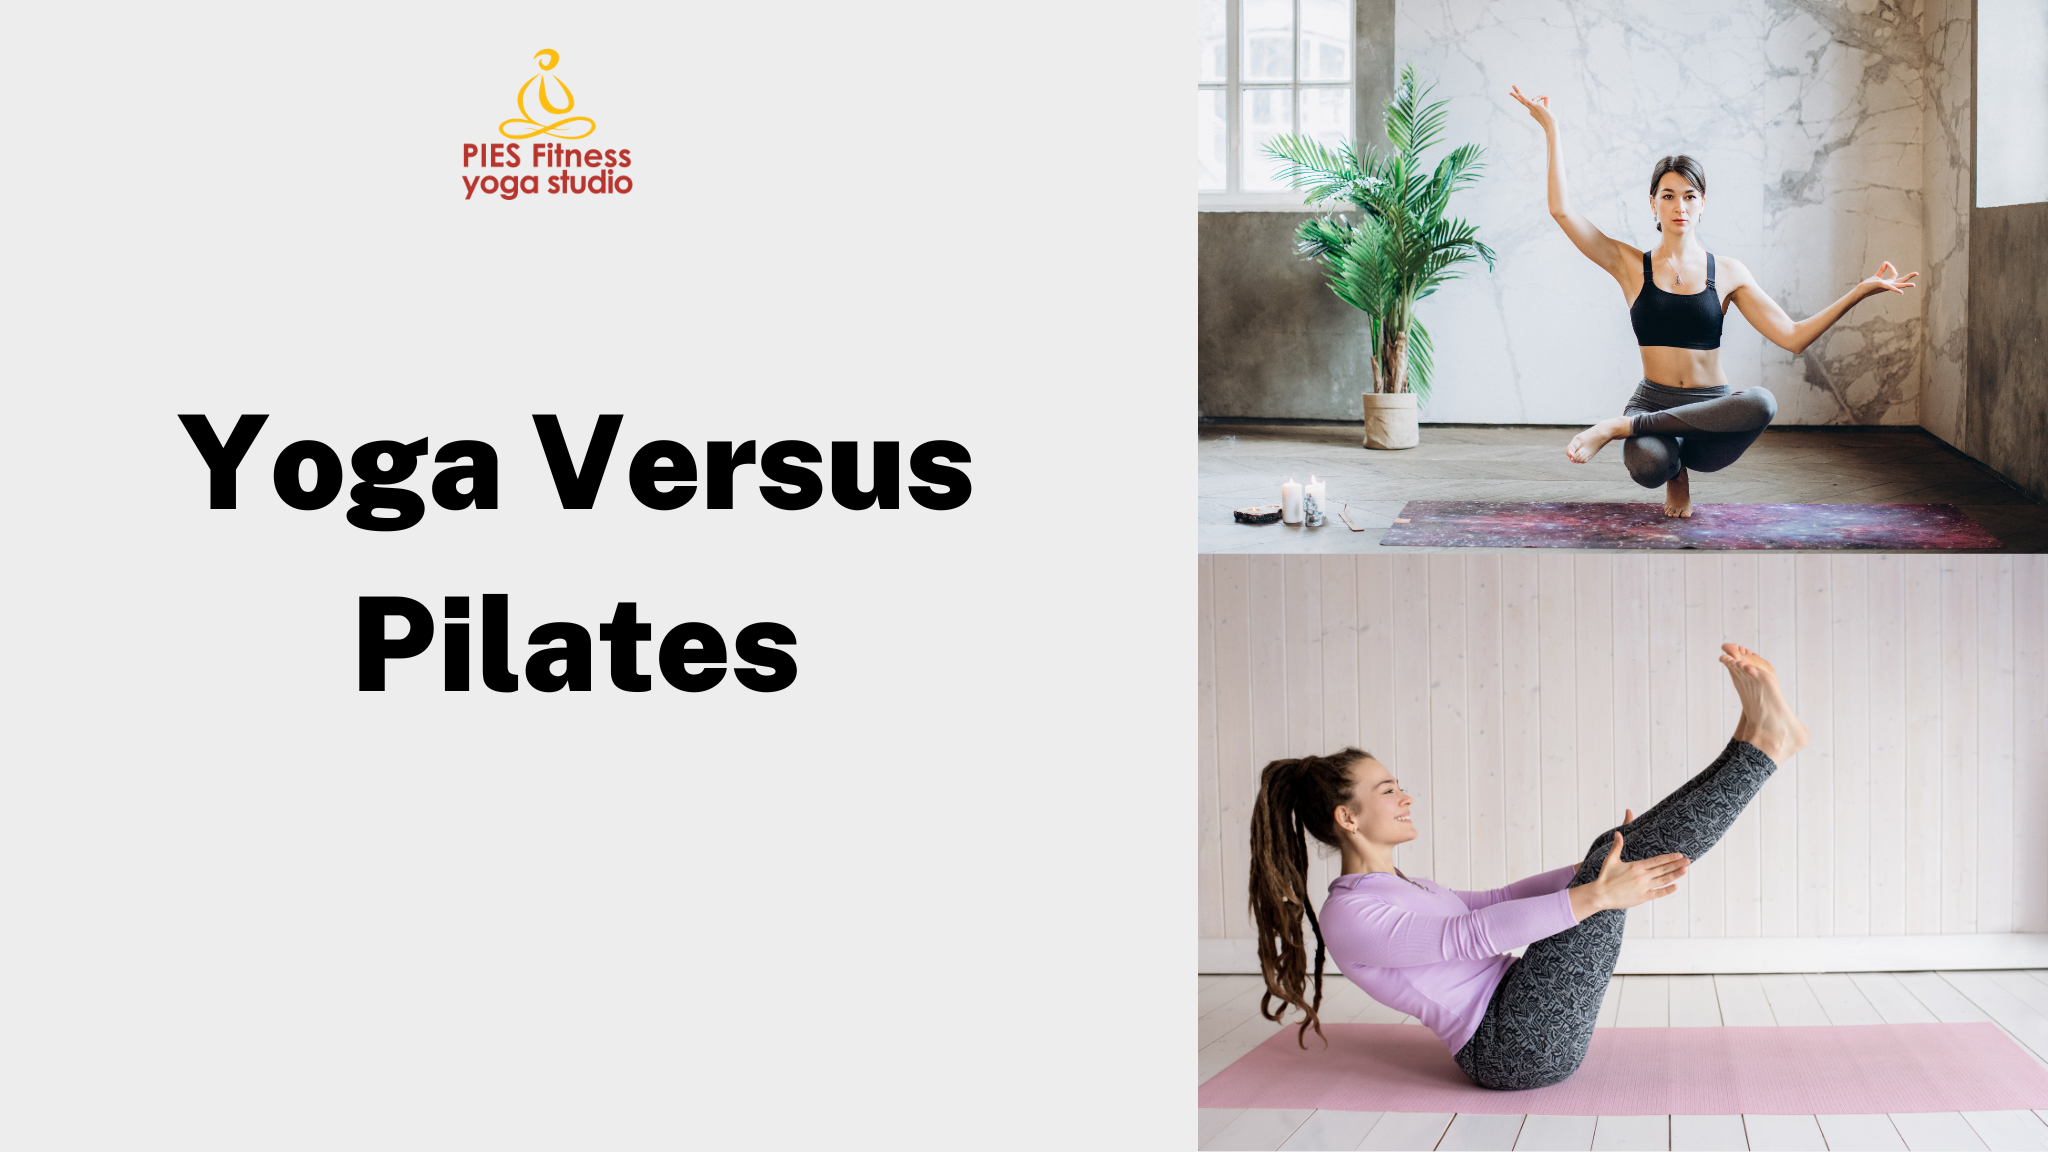 Pilates stretching - is Pilates good for stretching? The benefits